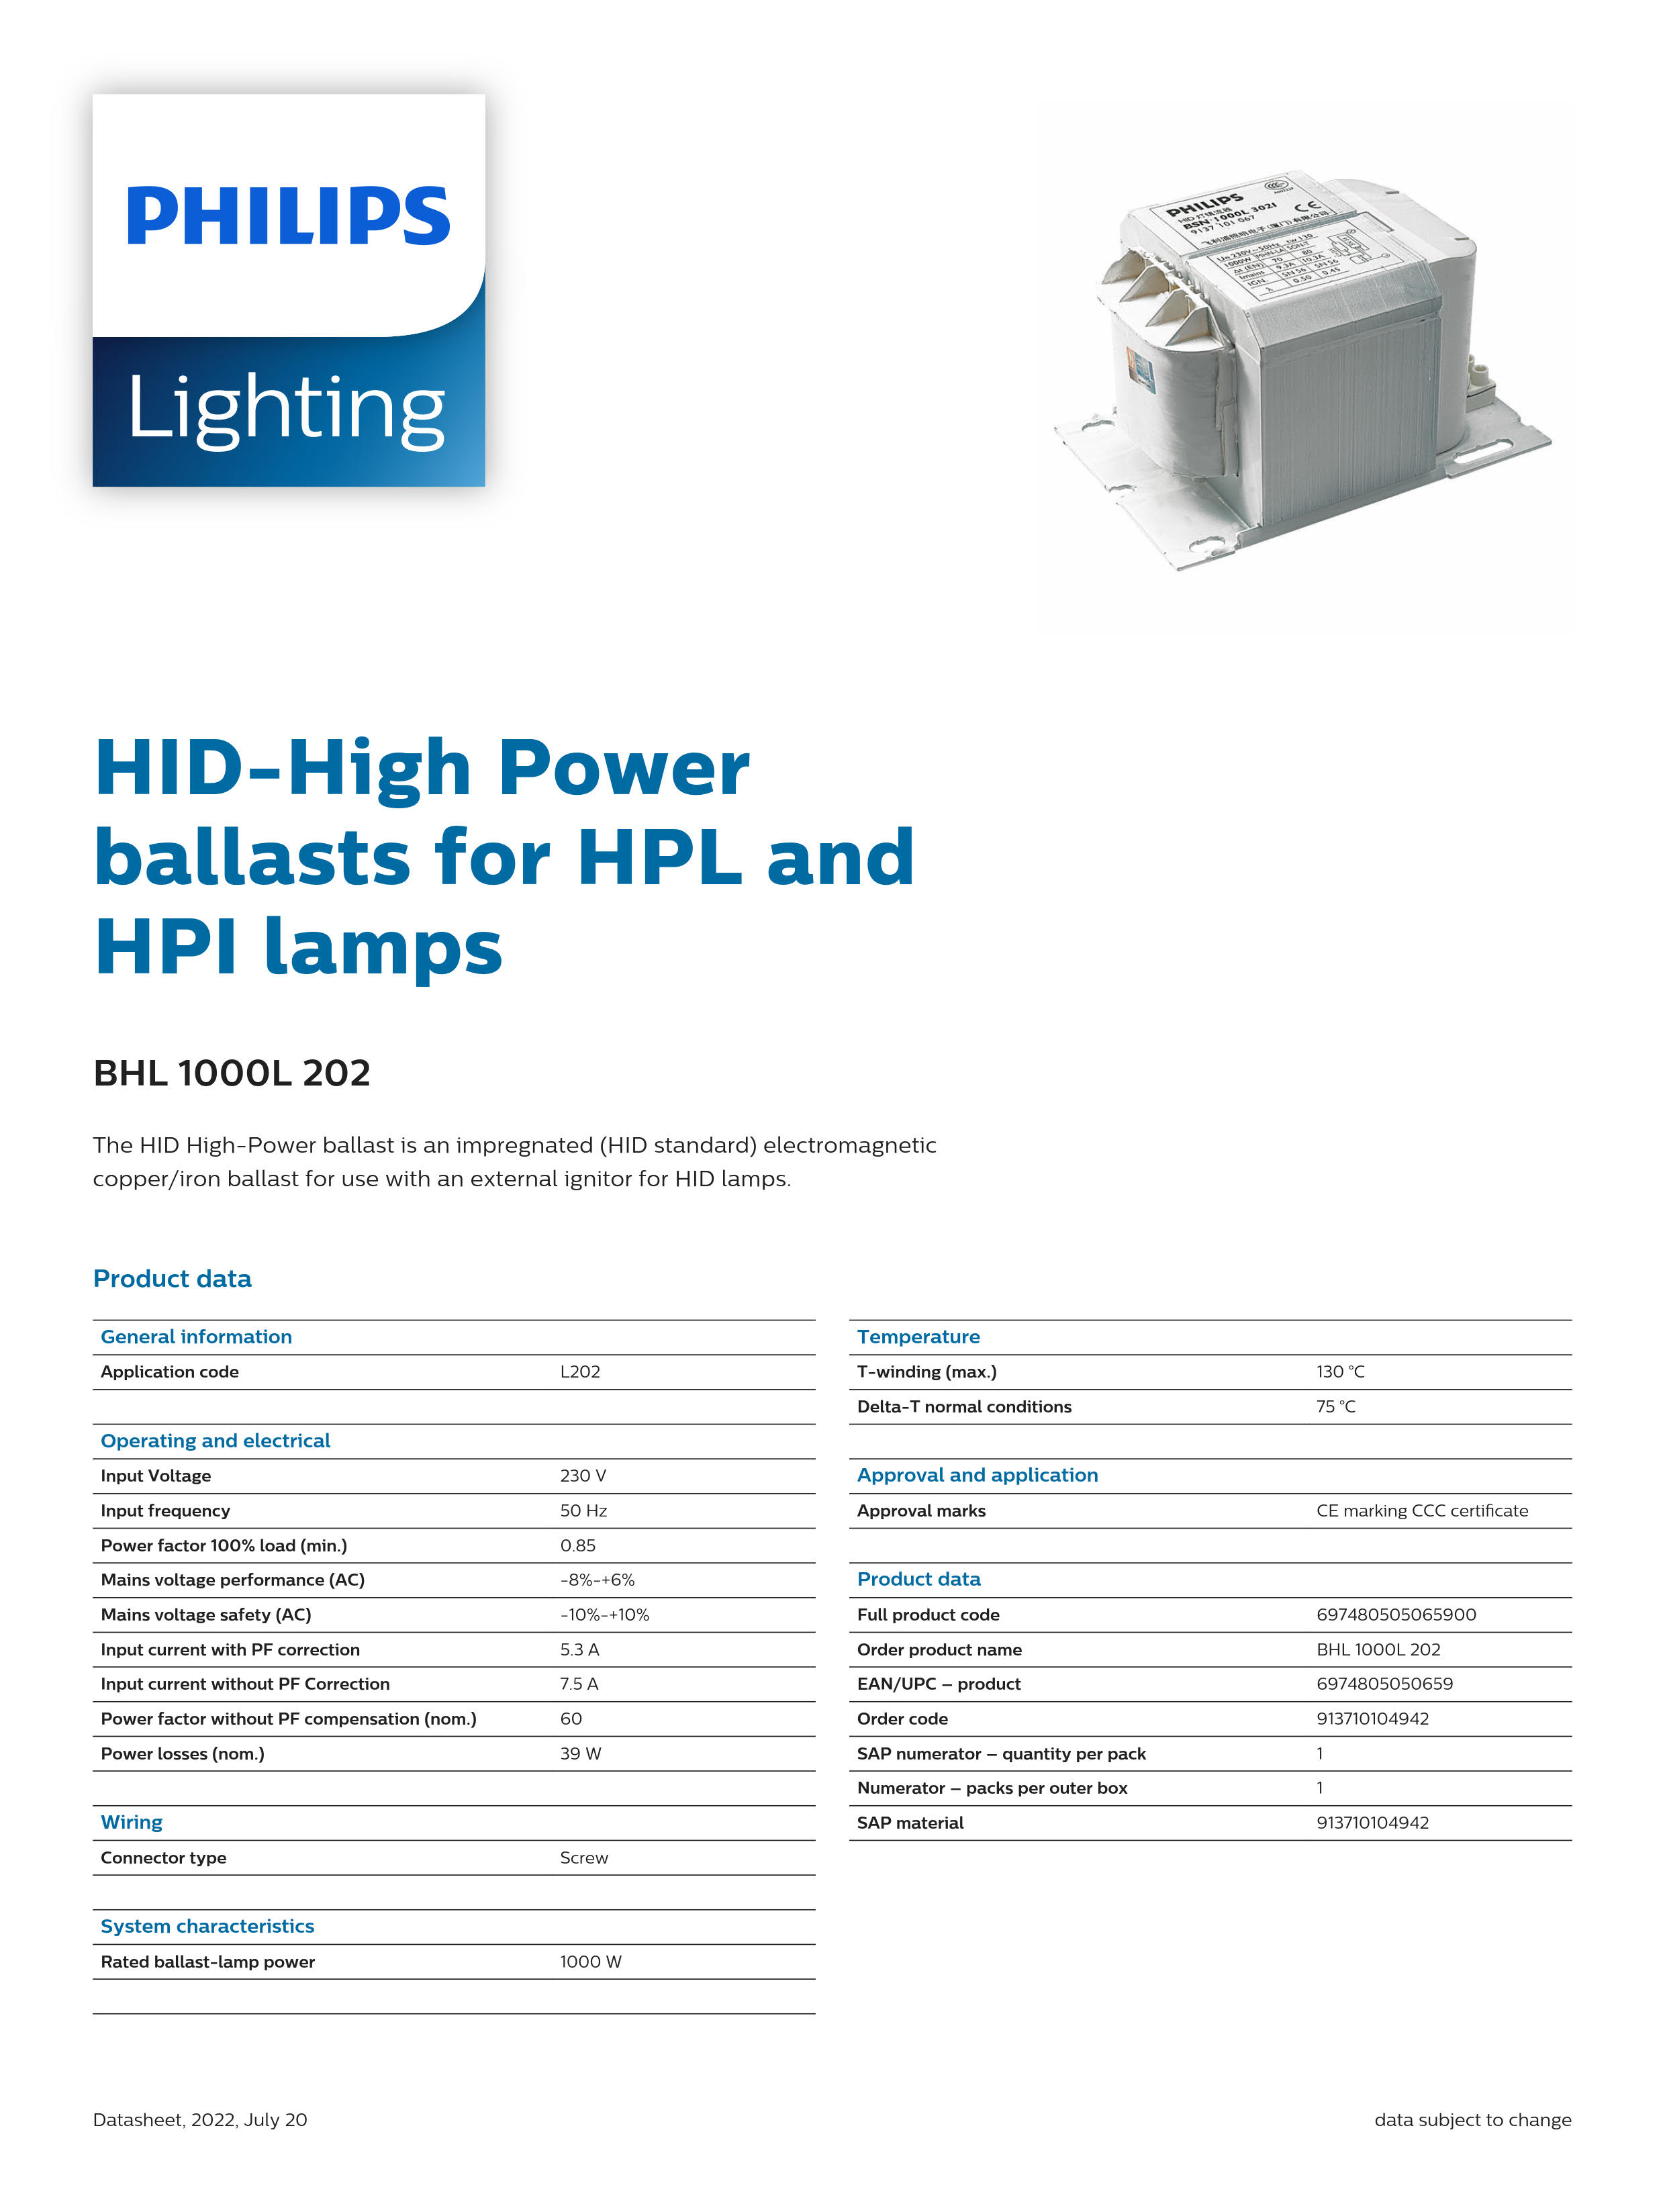 PHILIPS HID-Basic Ballasts for HPL and HPI Lamps BHL 1000L 202 913710104942